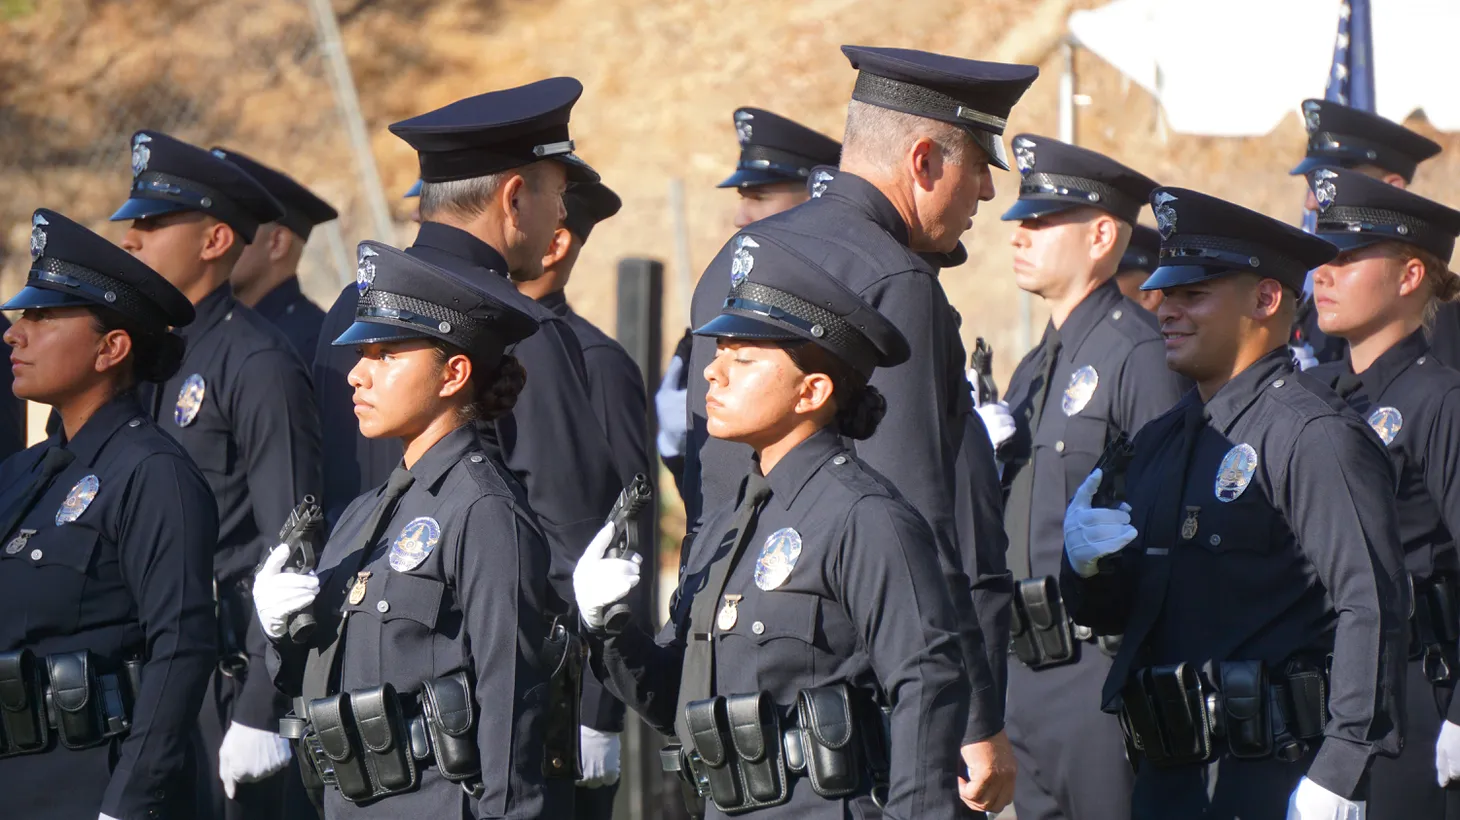 New LAPD officers are getting inspected during a police academy graduation ceremony in Elysian Park.